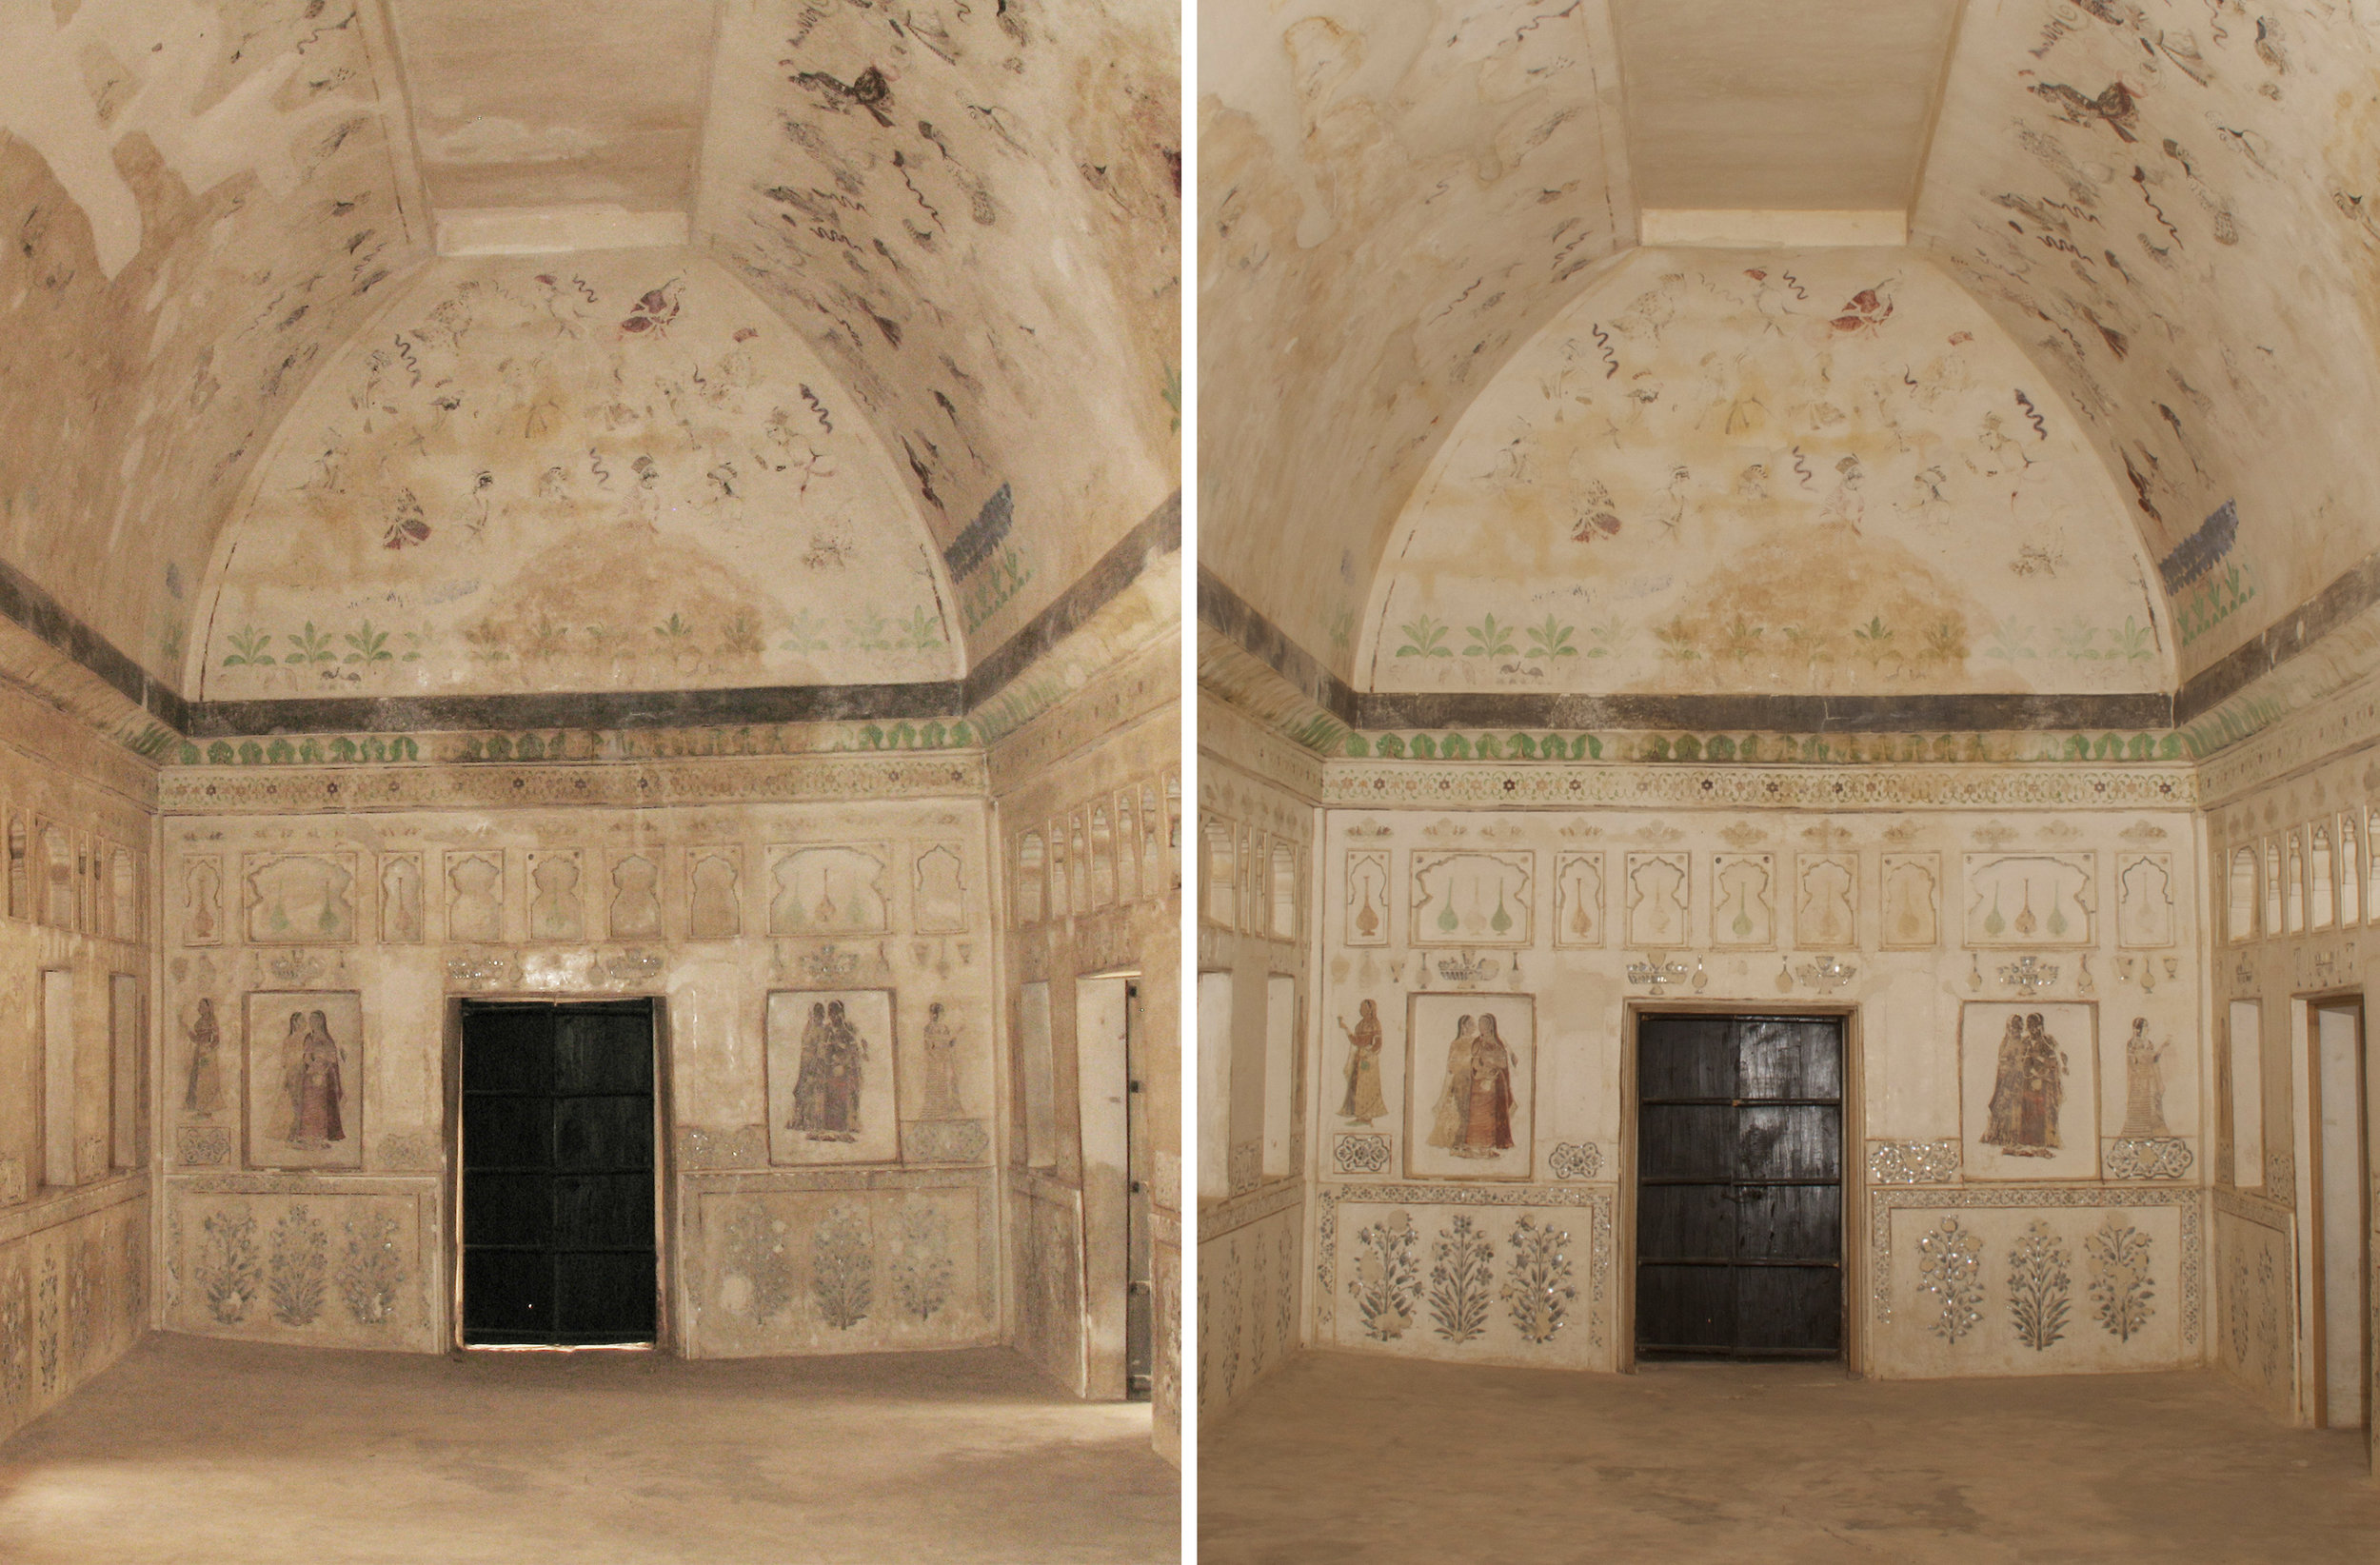  General view of the west wall before (left) and after (right) completion of conservation treatment.  Image © Courtauld CWPD 